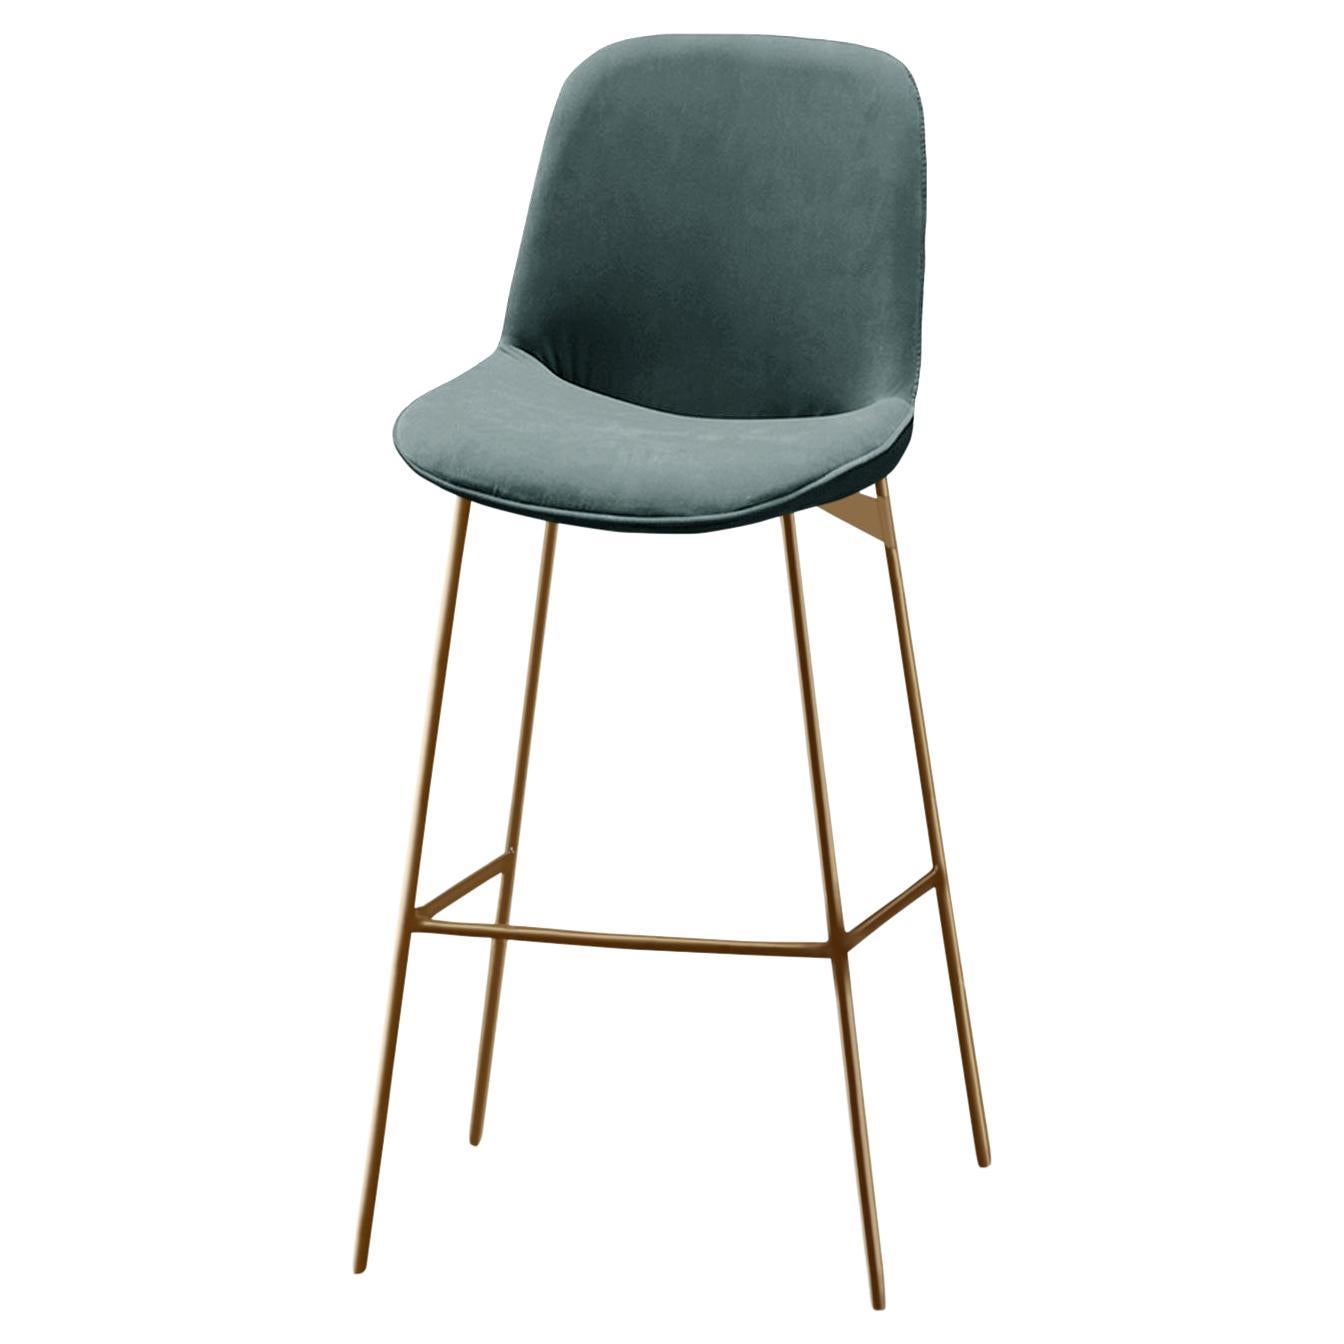 Chiado Bar Stool, Indigo Leather with Teal and Gold